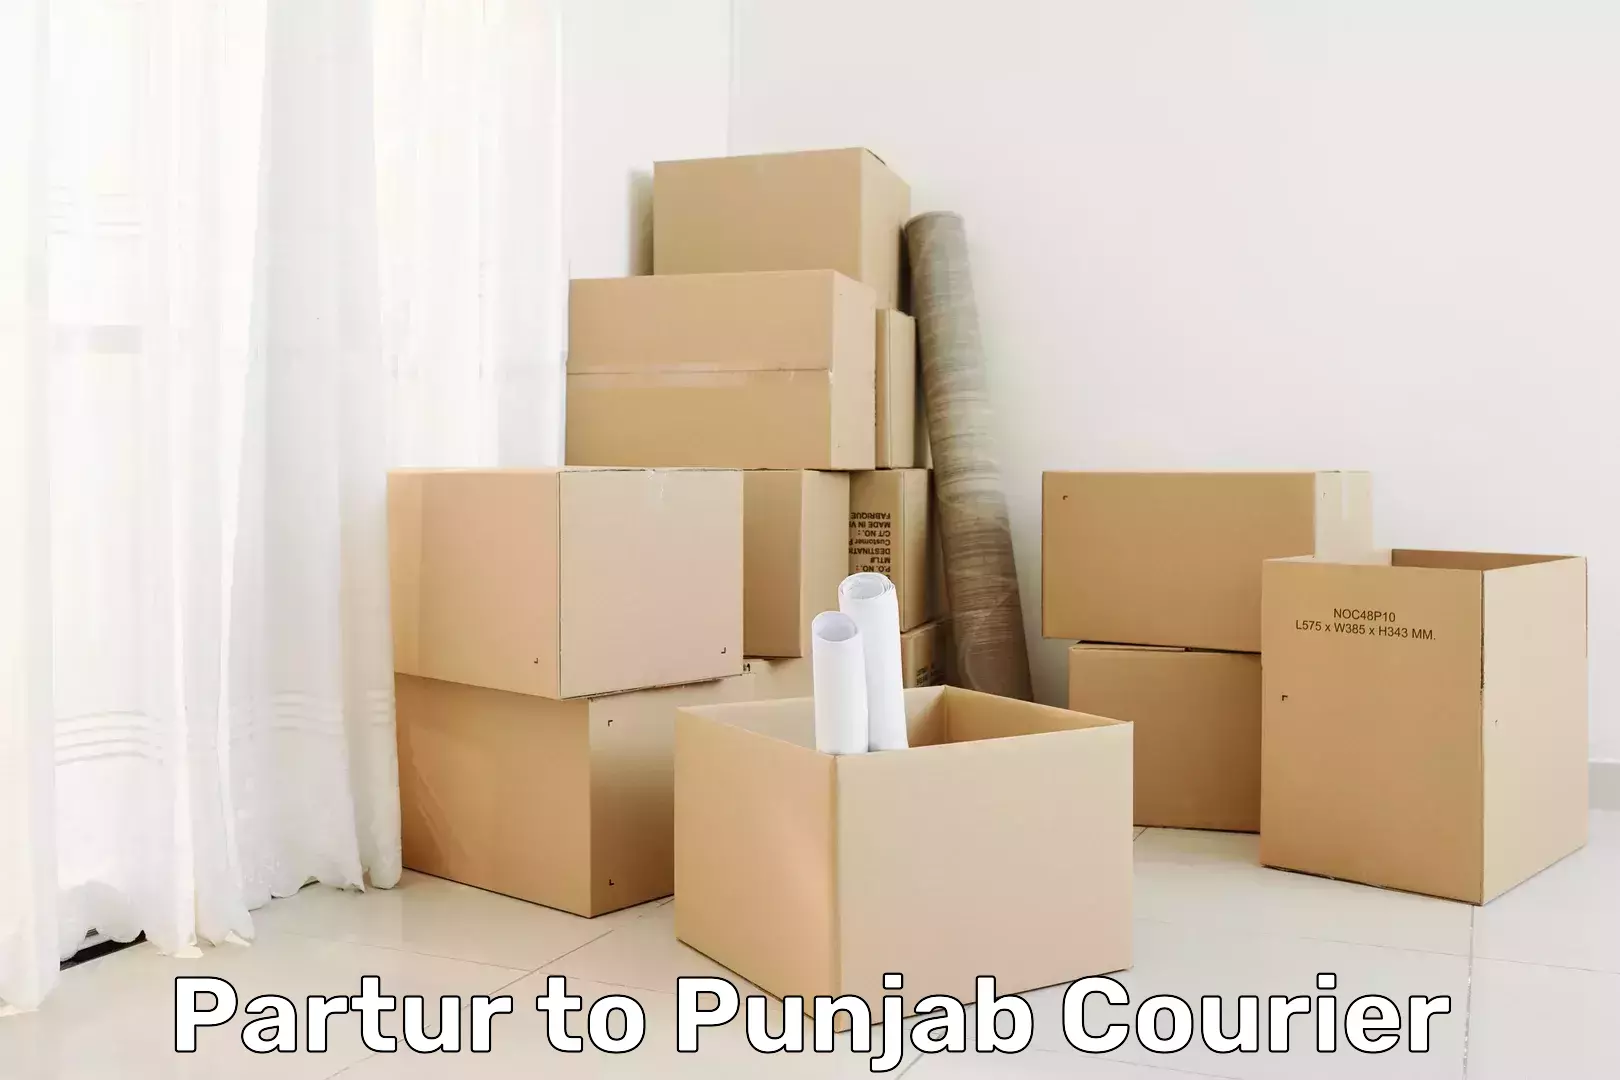 High-capacity shipping options Partur to Mohali